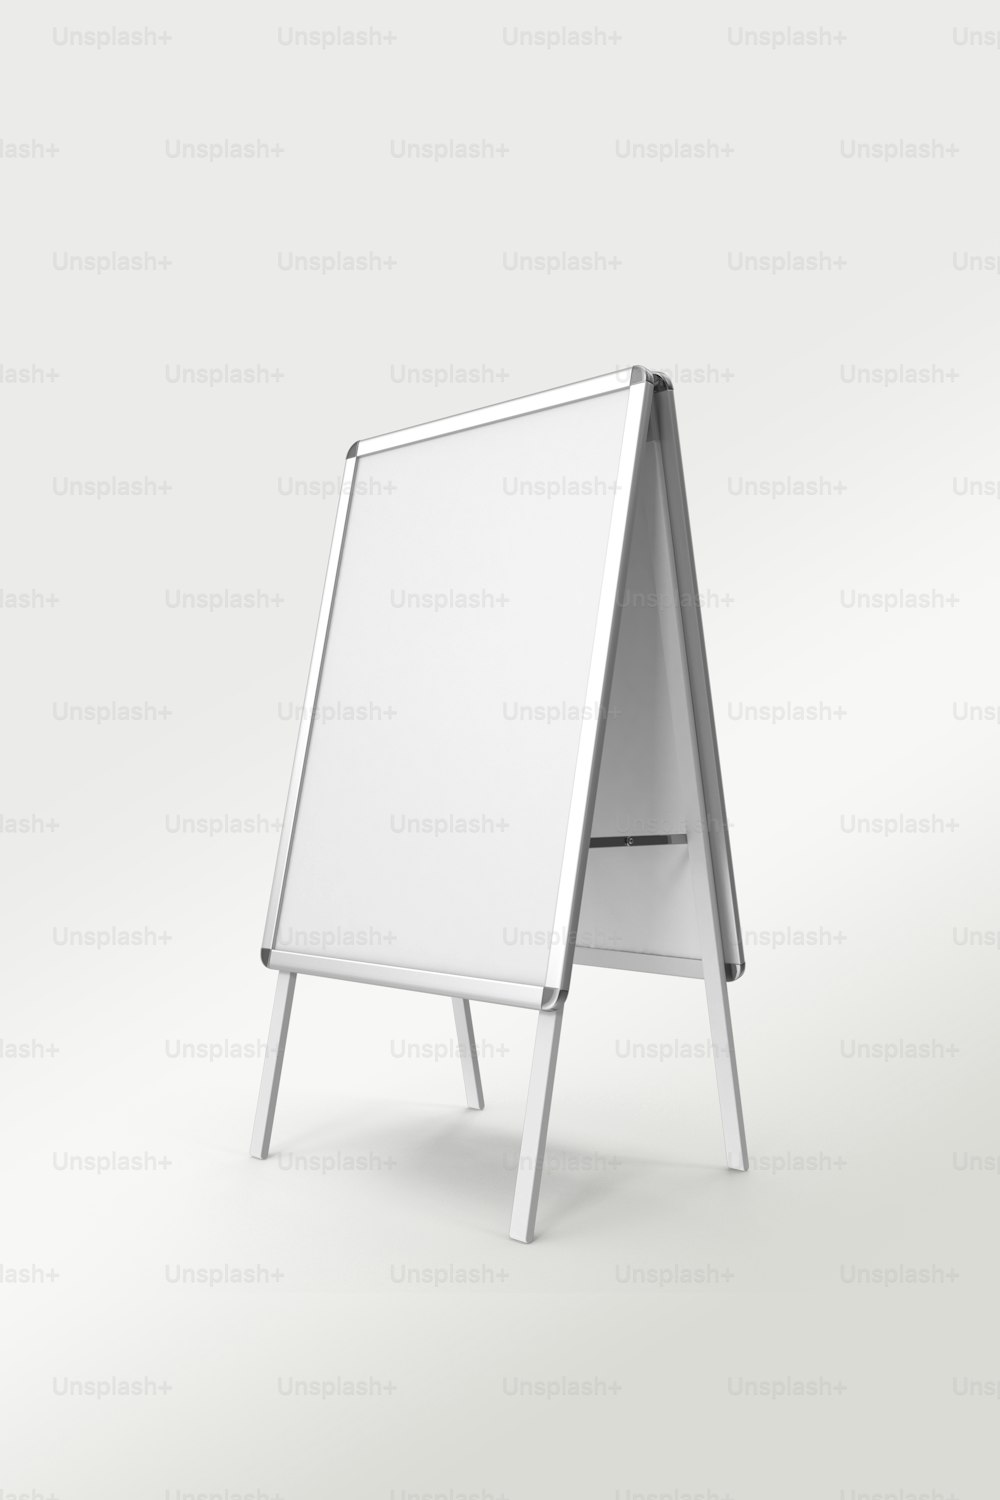 1K+ White Board Pictures  Download Free Images on Unsplash